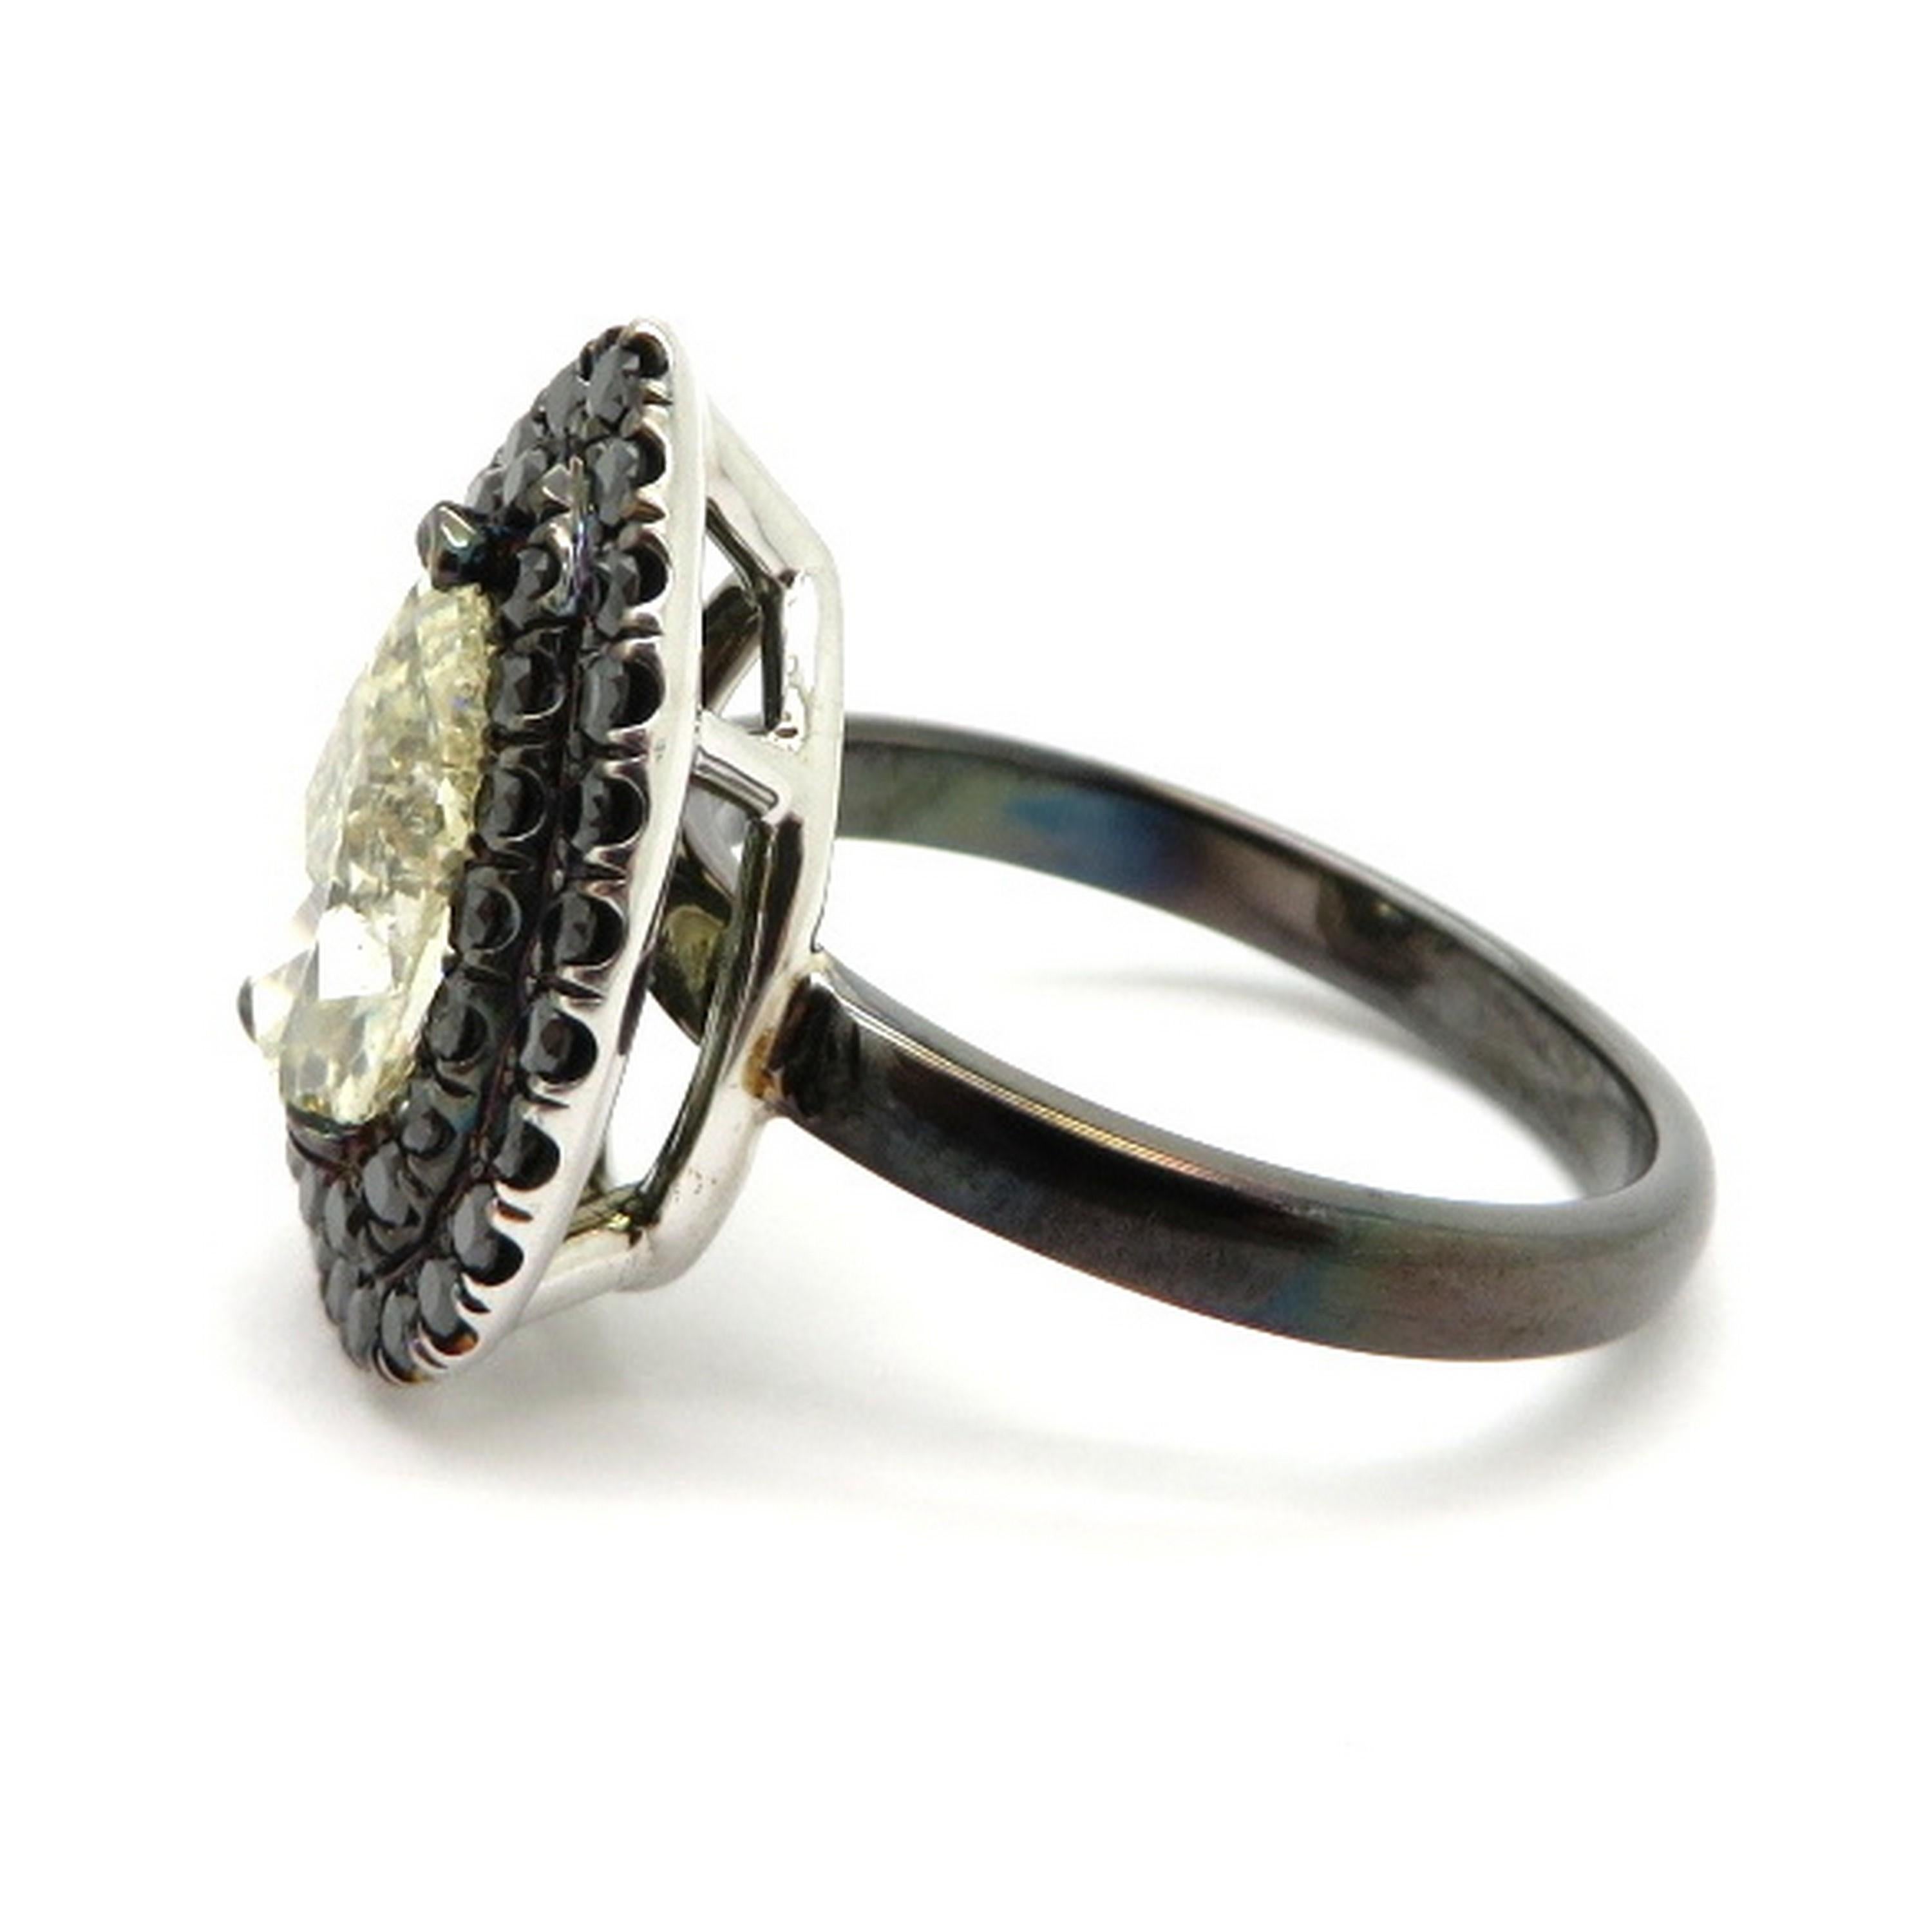 Estate 14K white gold black rhodium 1.50 carat pear shaped and pave diamond engagement ring. Showcasing one pear brilliant cut diamond, three prong set, weighing approximately 1.50 carats. Diamond grading: color grade: K. Clarity grade: SI2.